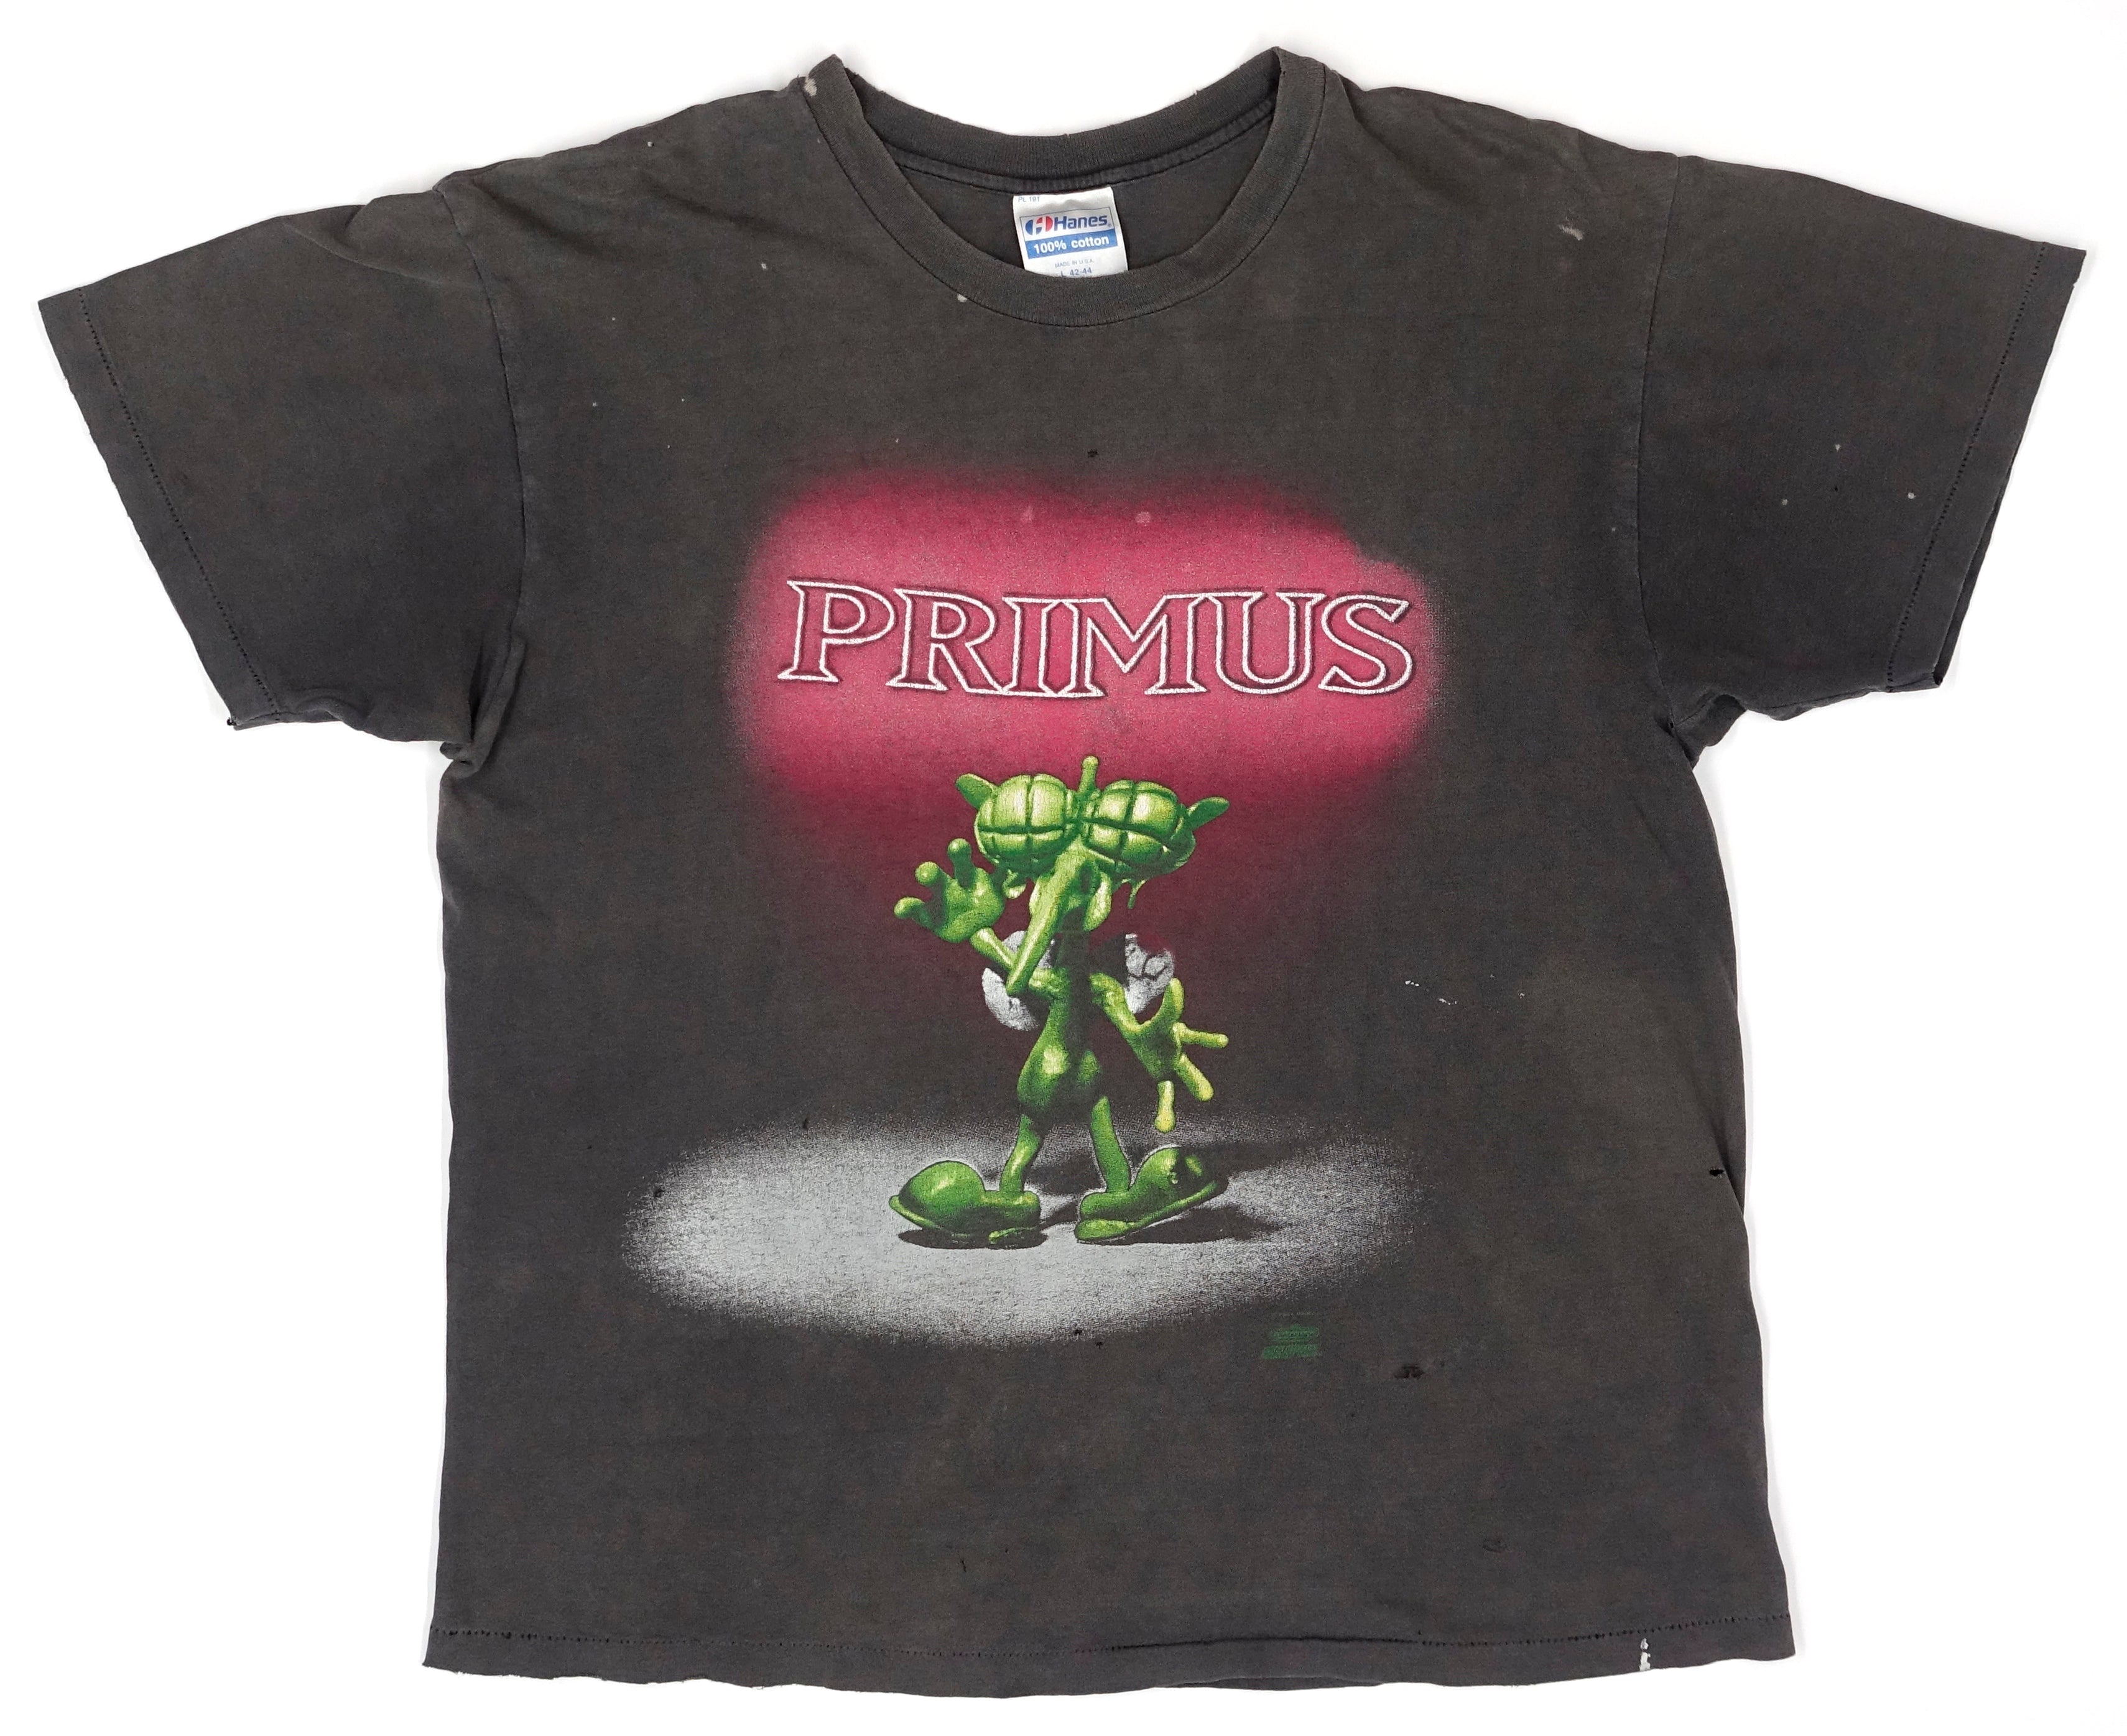 Primus - Mosquito Guy / Sailing The Seas Of Cheese 1991 Tour Shirt Size Large